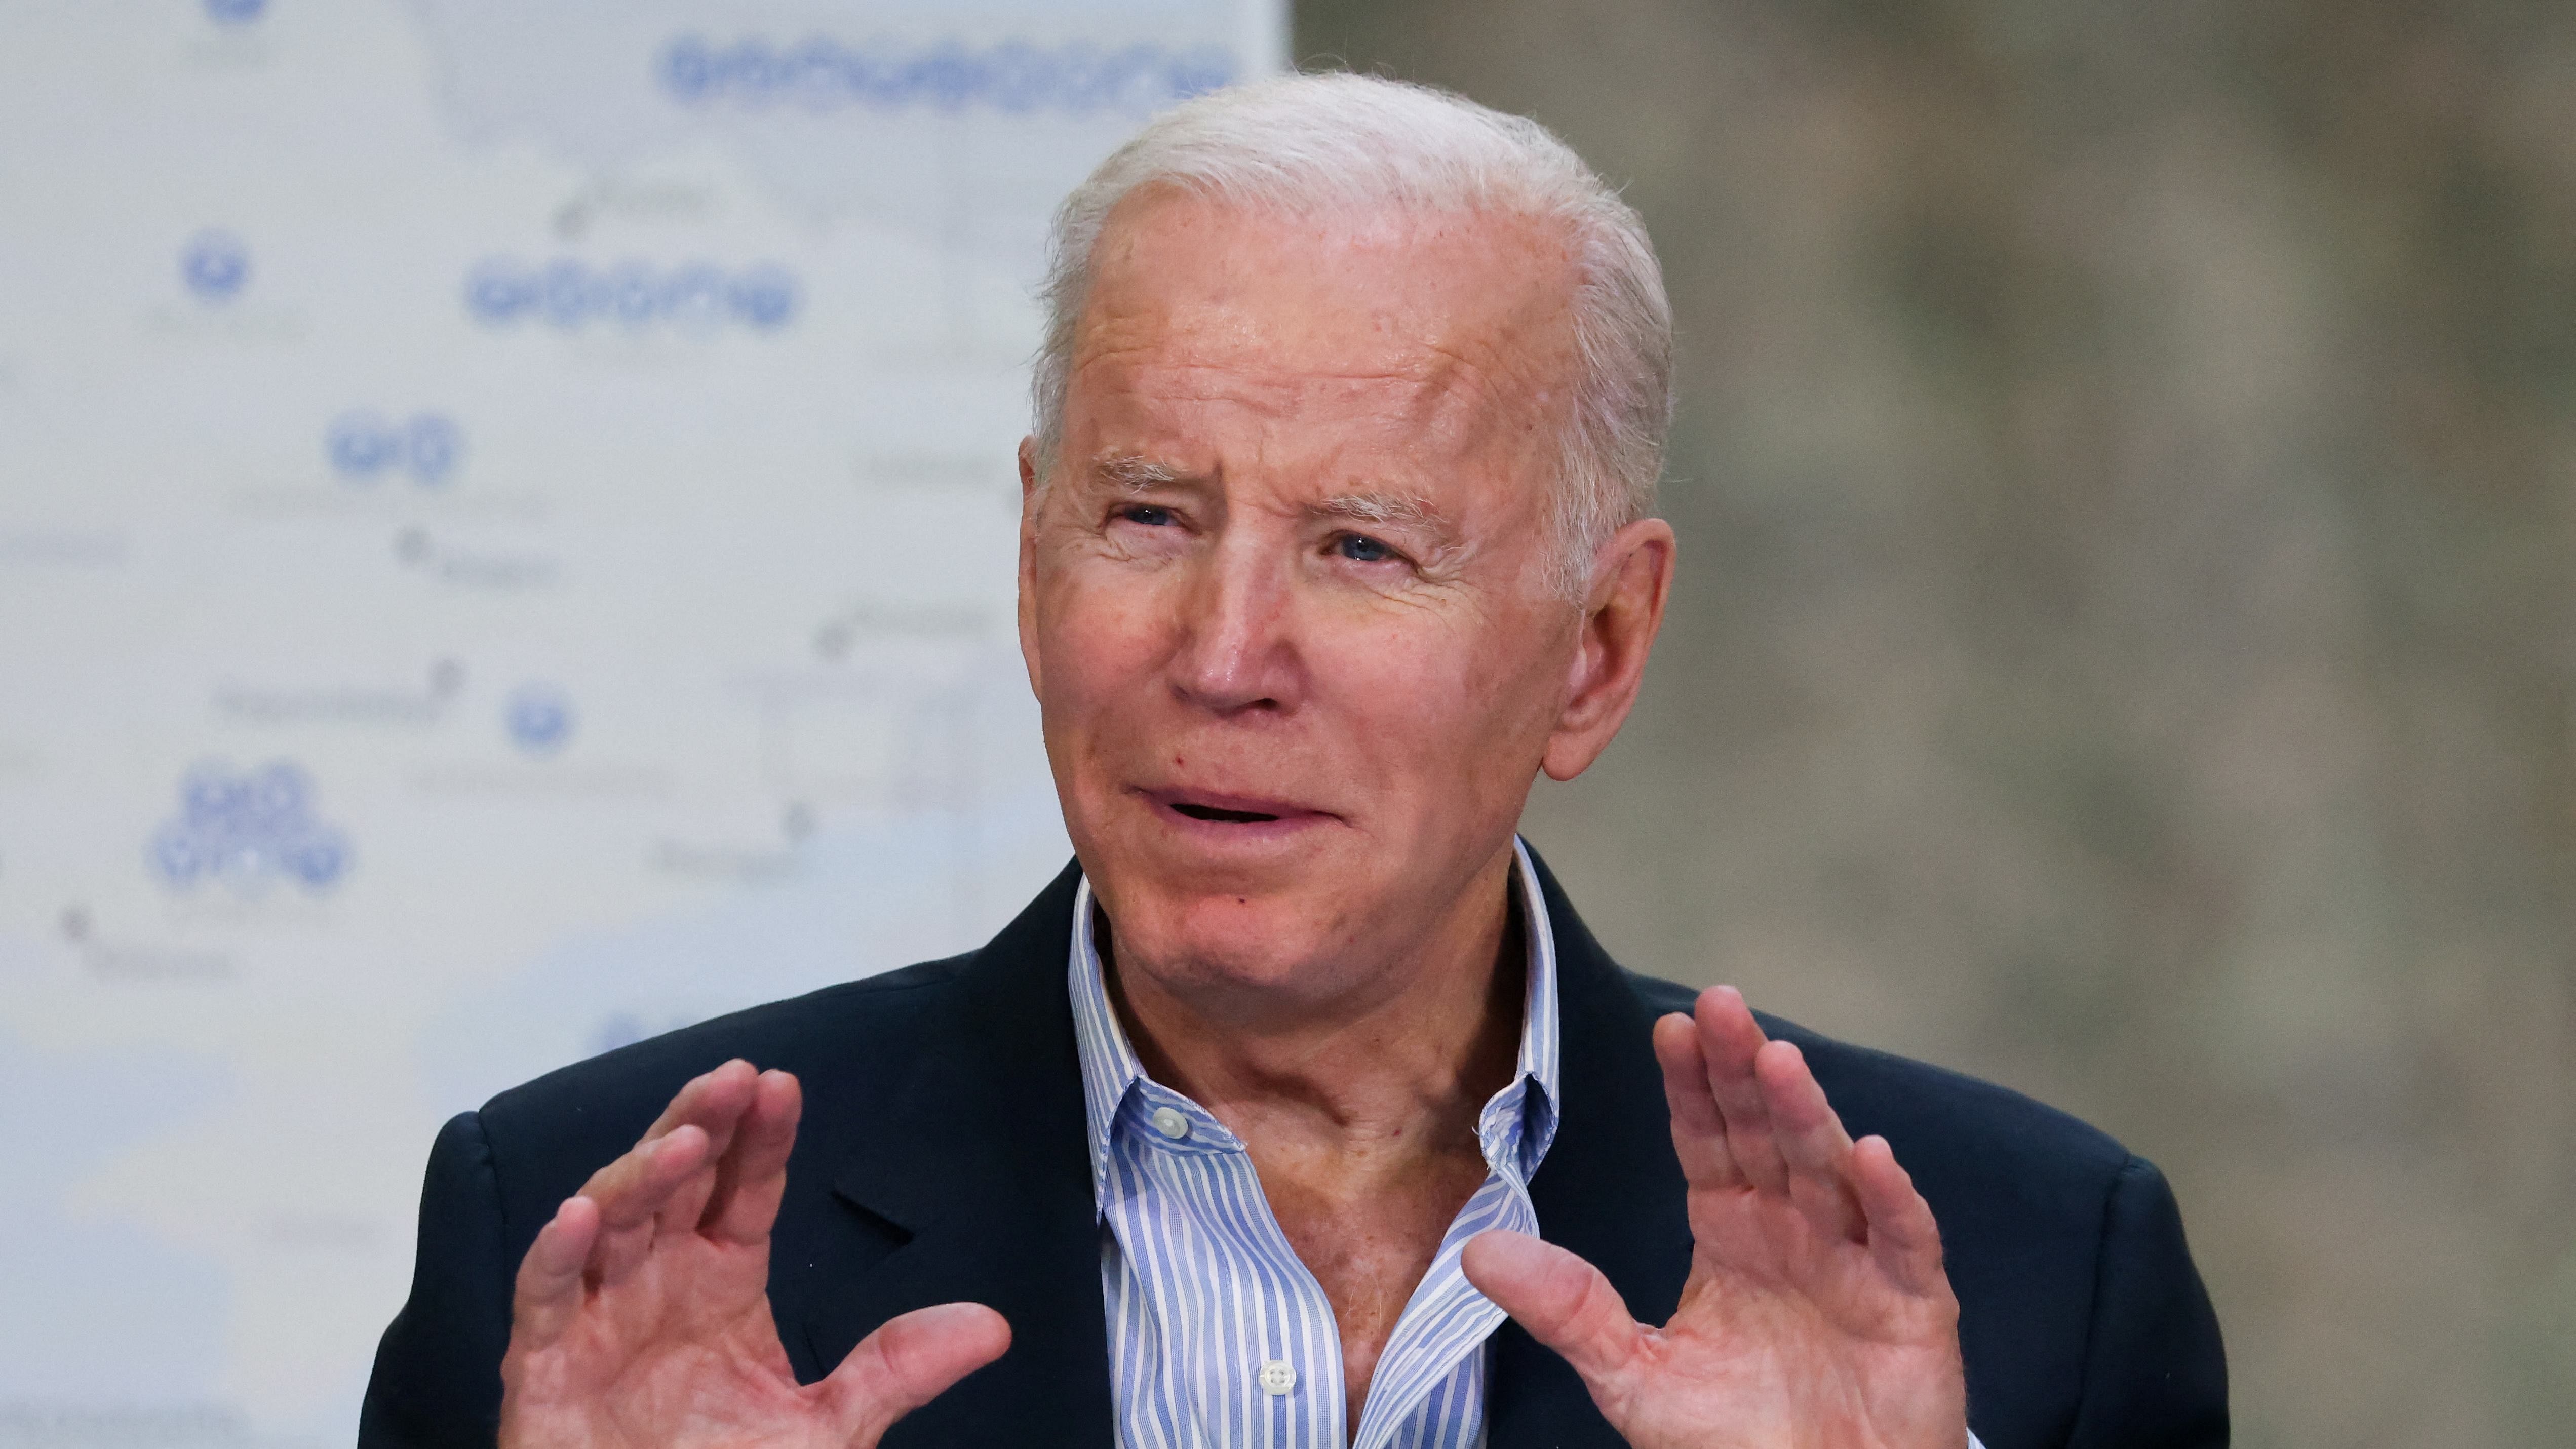 Biden, who took office last year after a violently contested election, vowed to restore democracy at home and unite democracies abroad to confront autocrats including the Russian president and China's leader Xi Jinping. Credit: Reuters File Photo